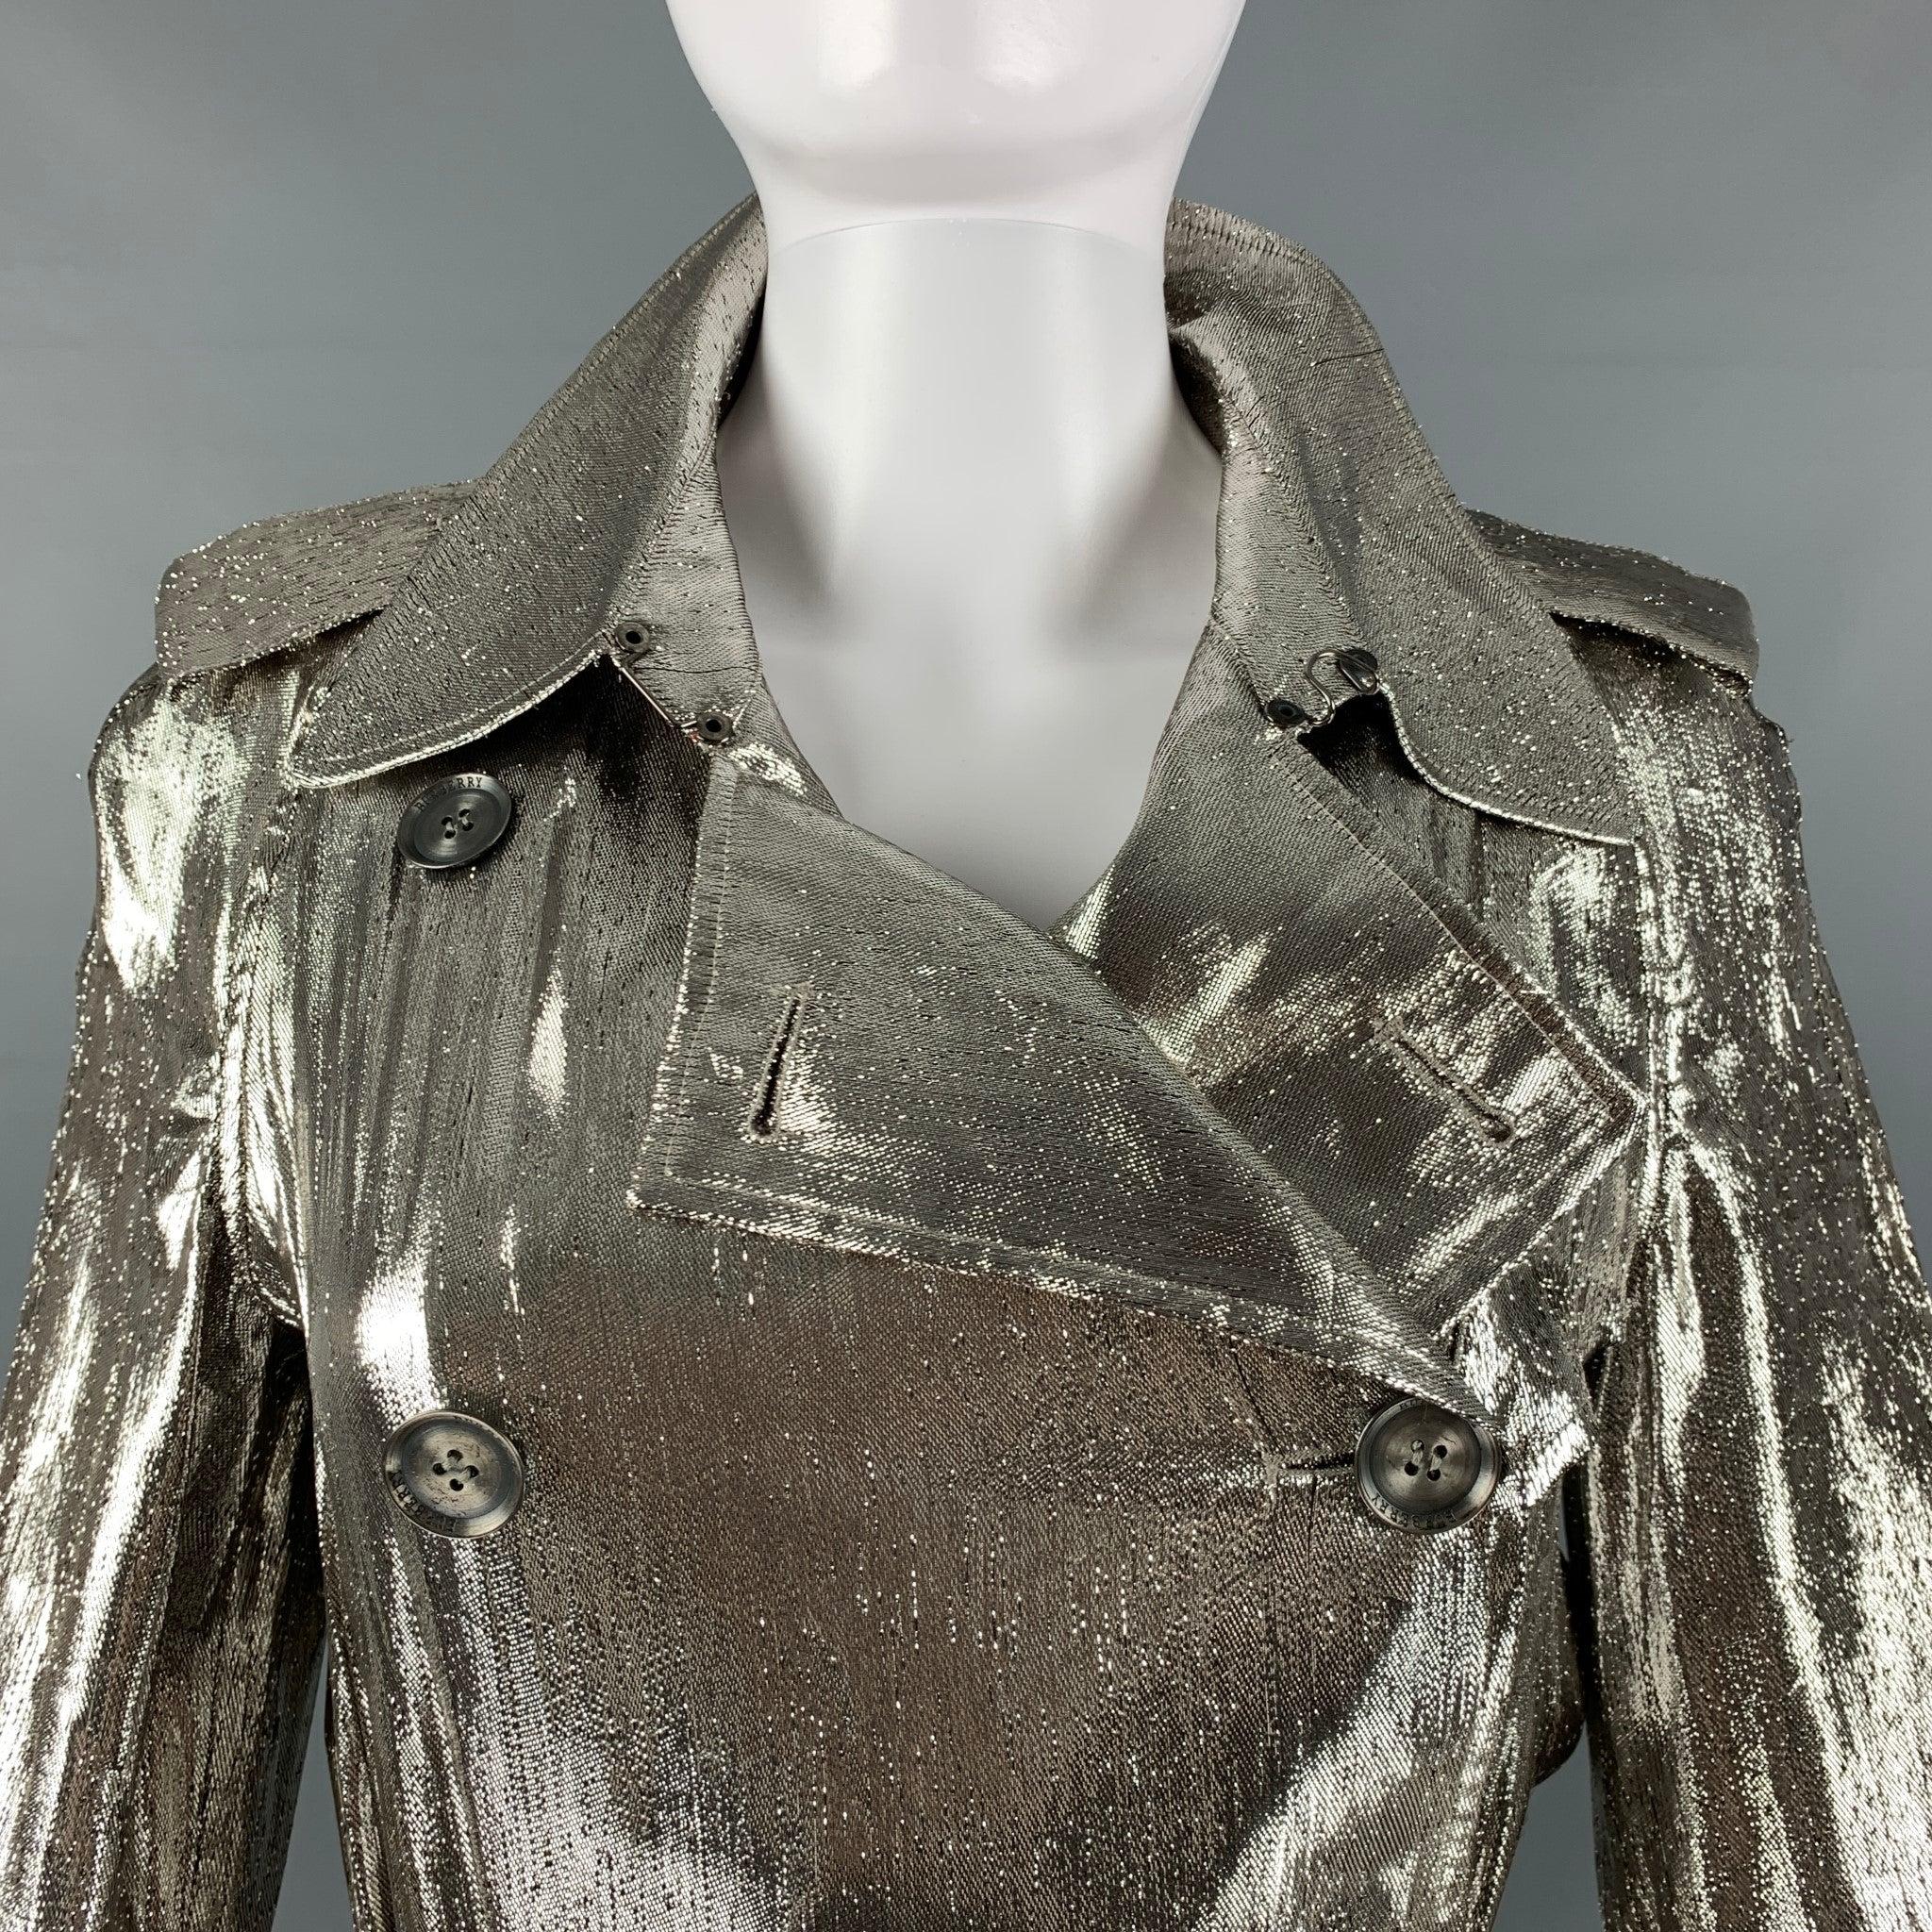 BURBERRY PRORSUM trench coat in a silver metallic woven material featuring a double breasted and belted style, notch lapel, and button closure. Made in Italy.Very Good Pre-Owned Condition. Minor signs of wear. 

Marked:   S 

Measurements: 
